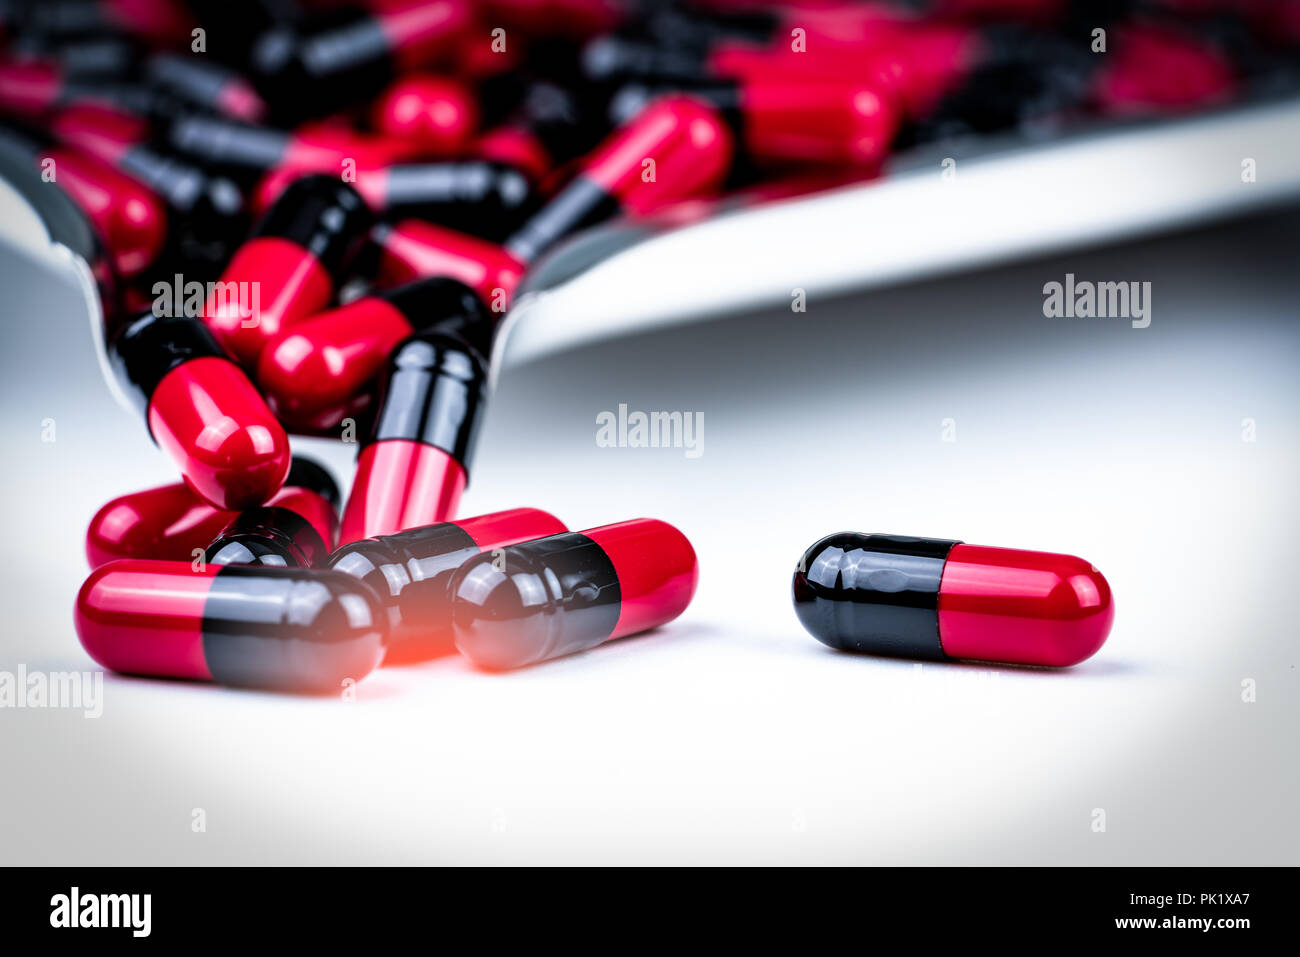 Selective focus of red and black capsule pills on stainless steel drug tray. Antibiotics drug resistance. Global healthcare. Antimicrobial capsule pil Stock Photo